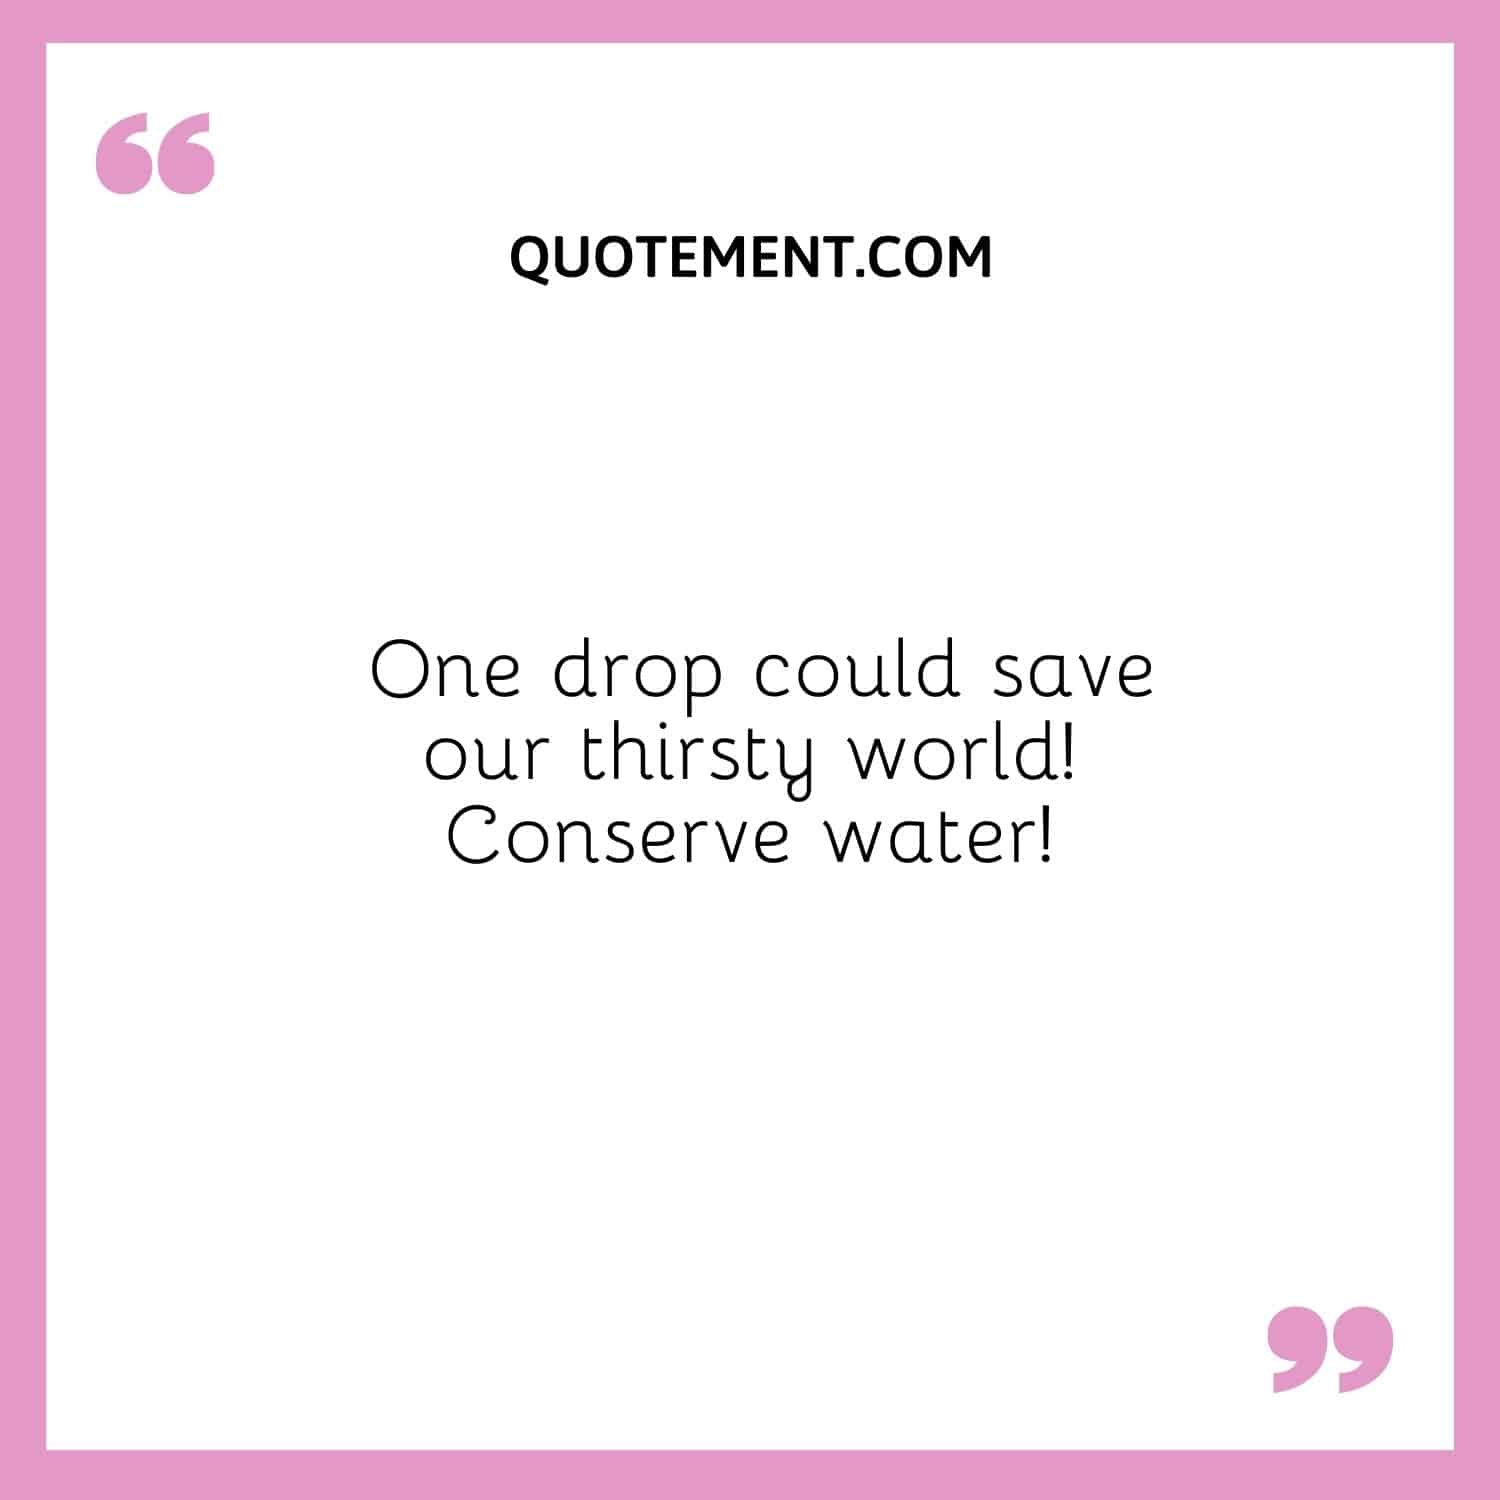 One drop could save our thirsty world!